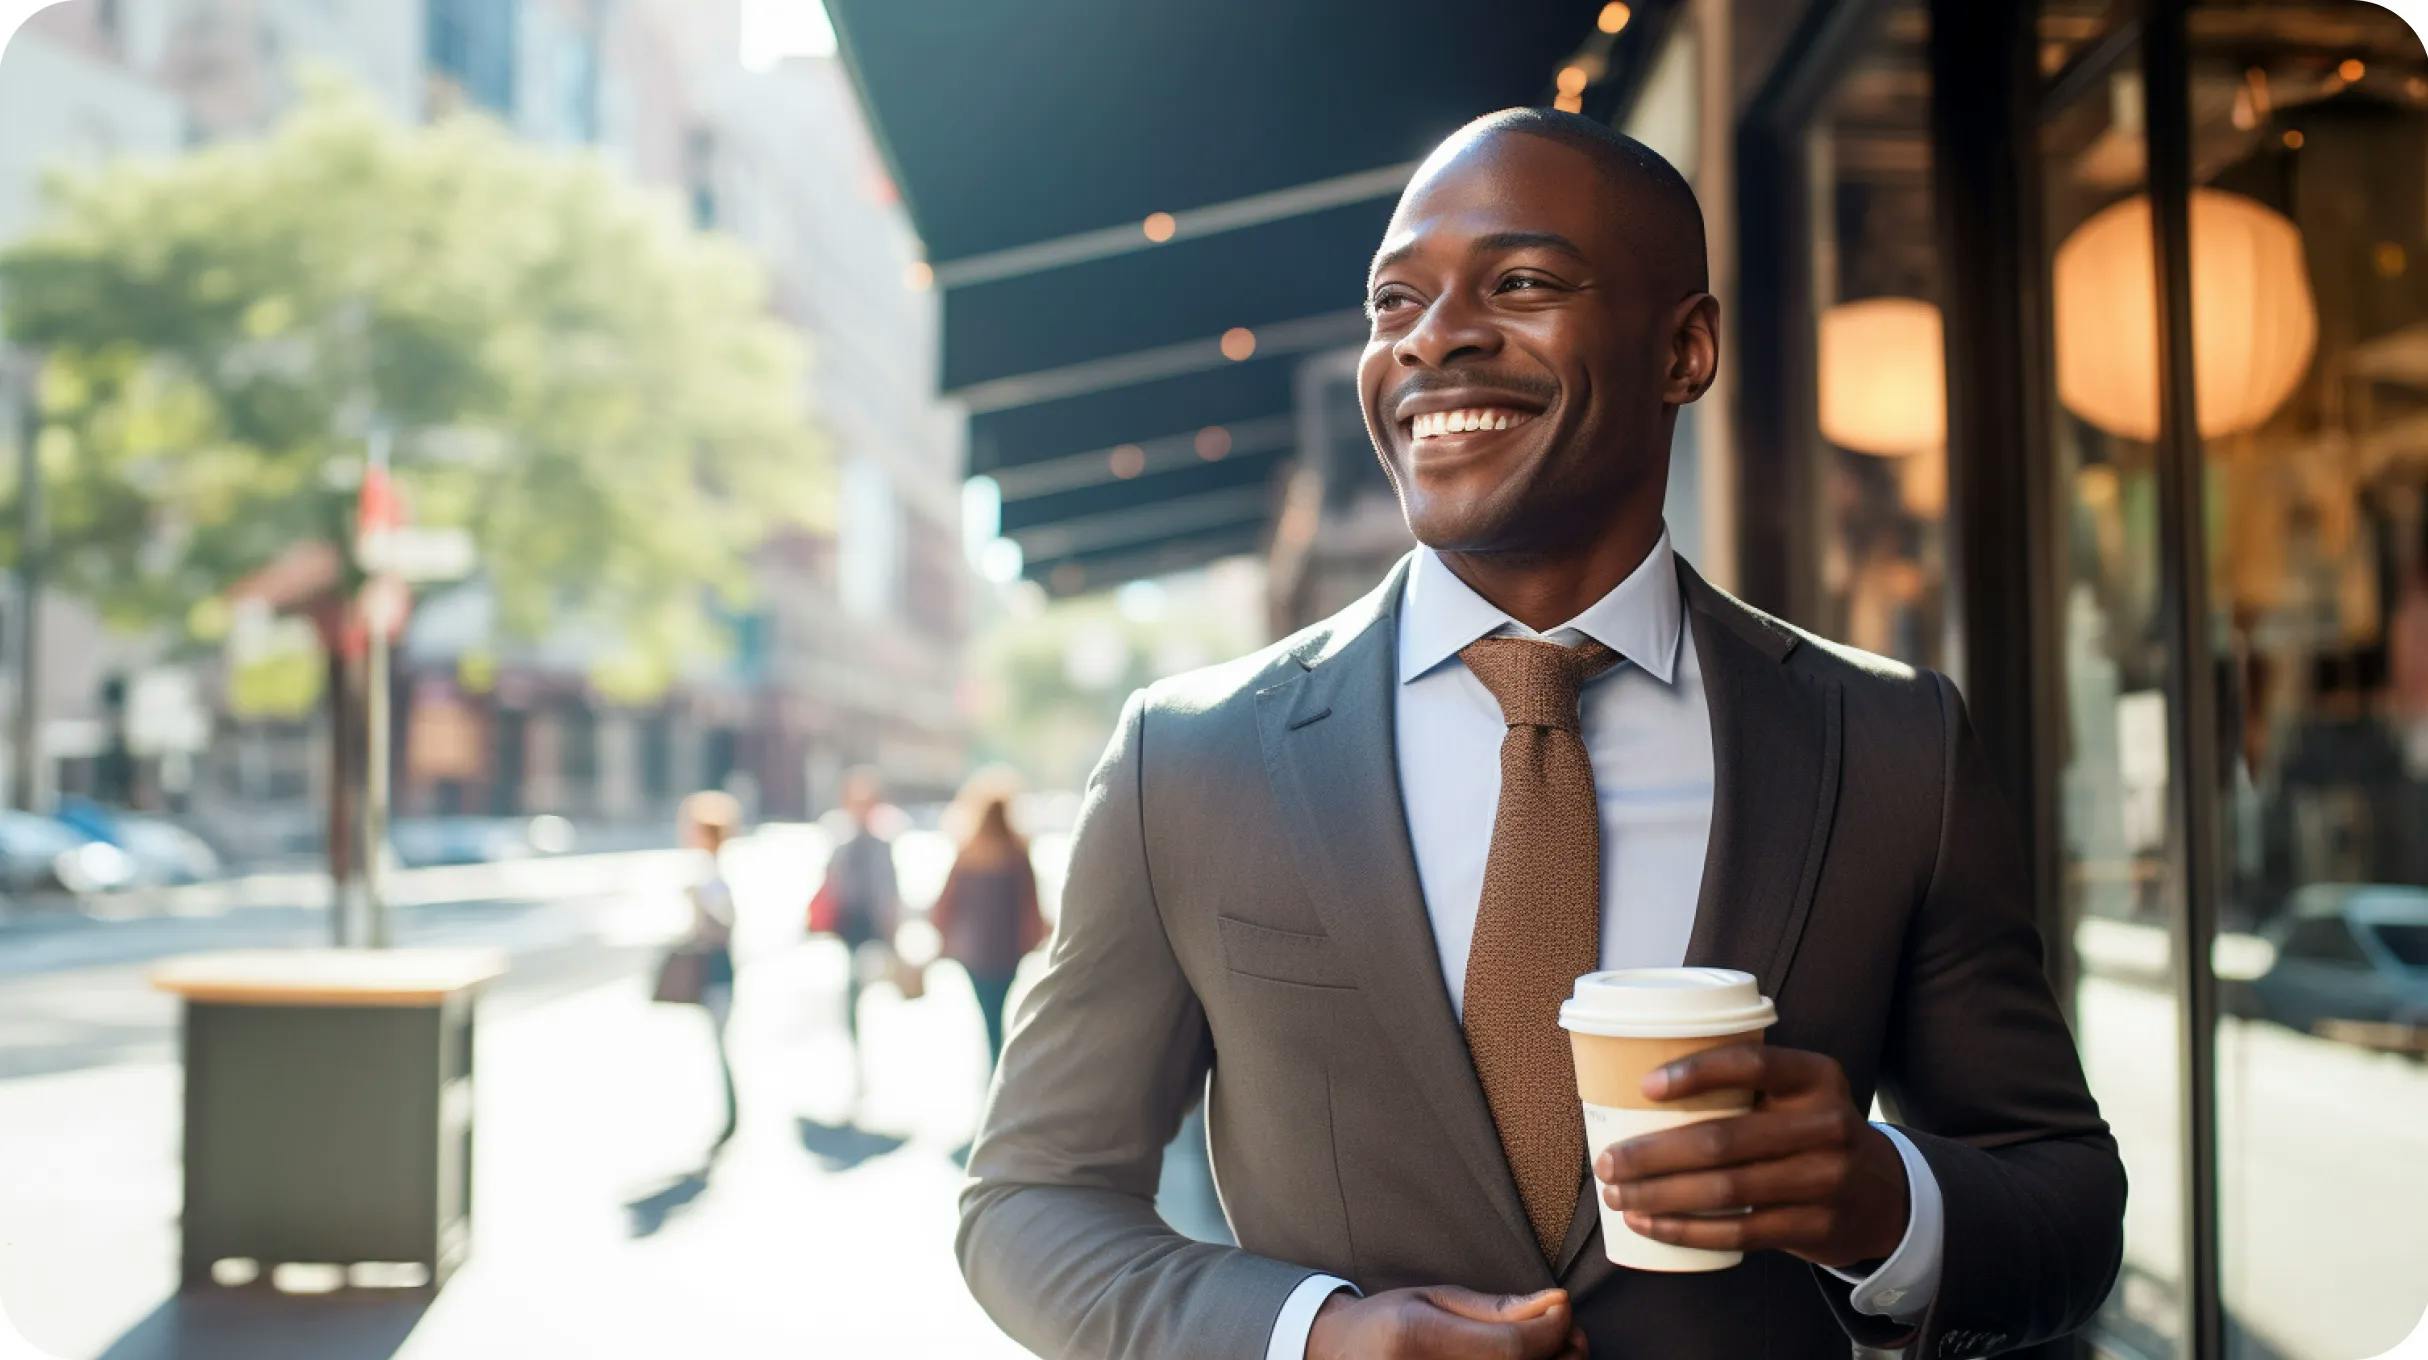 Smiling elegant man in a suit, walking on a sidewalk with a coffee in hand